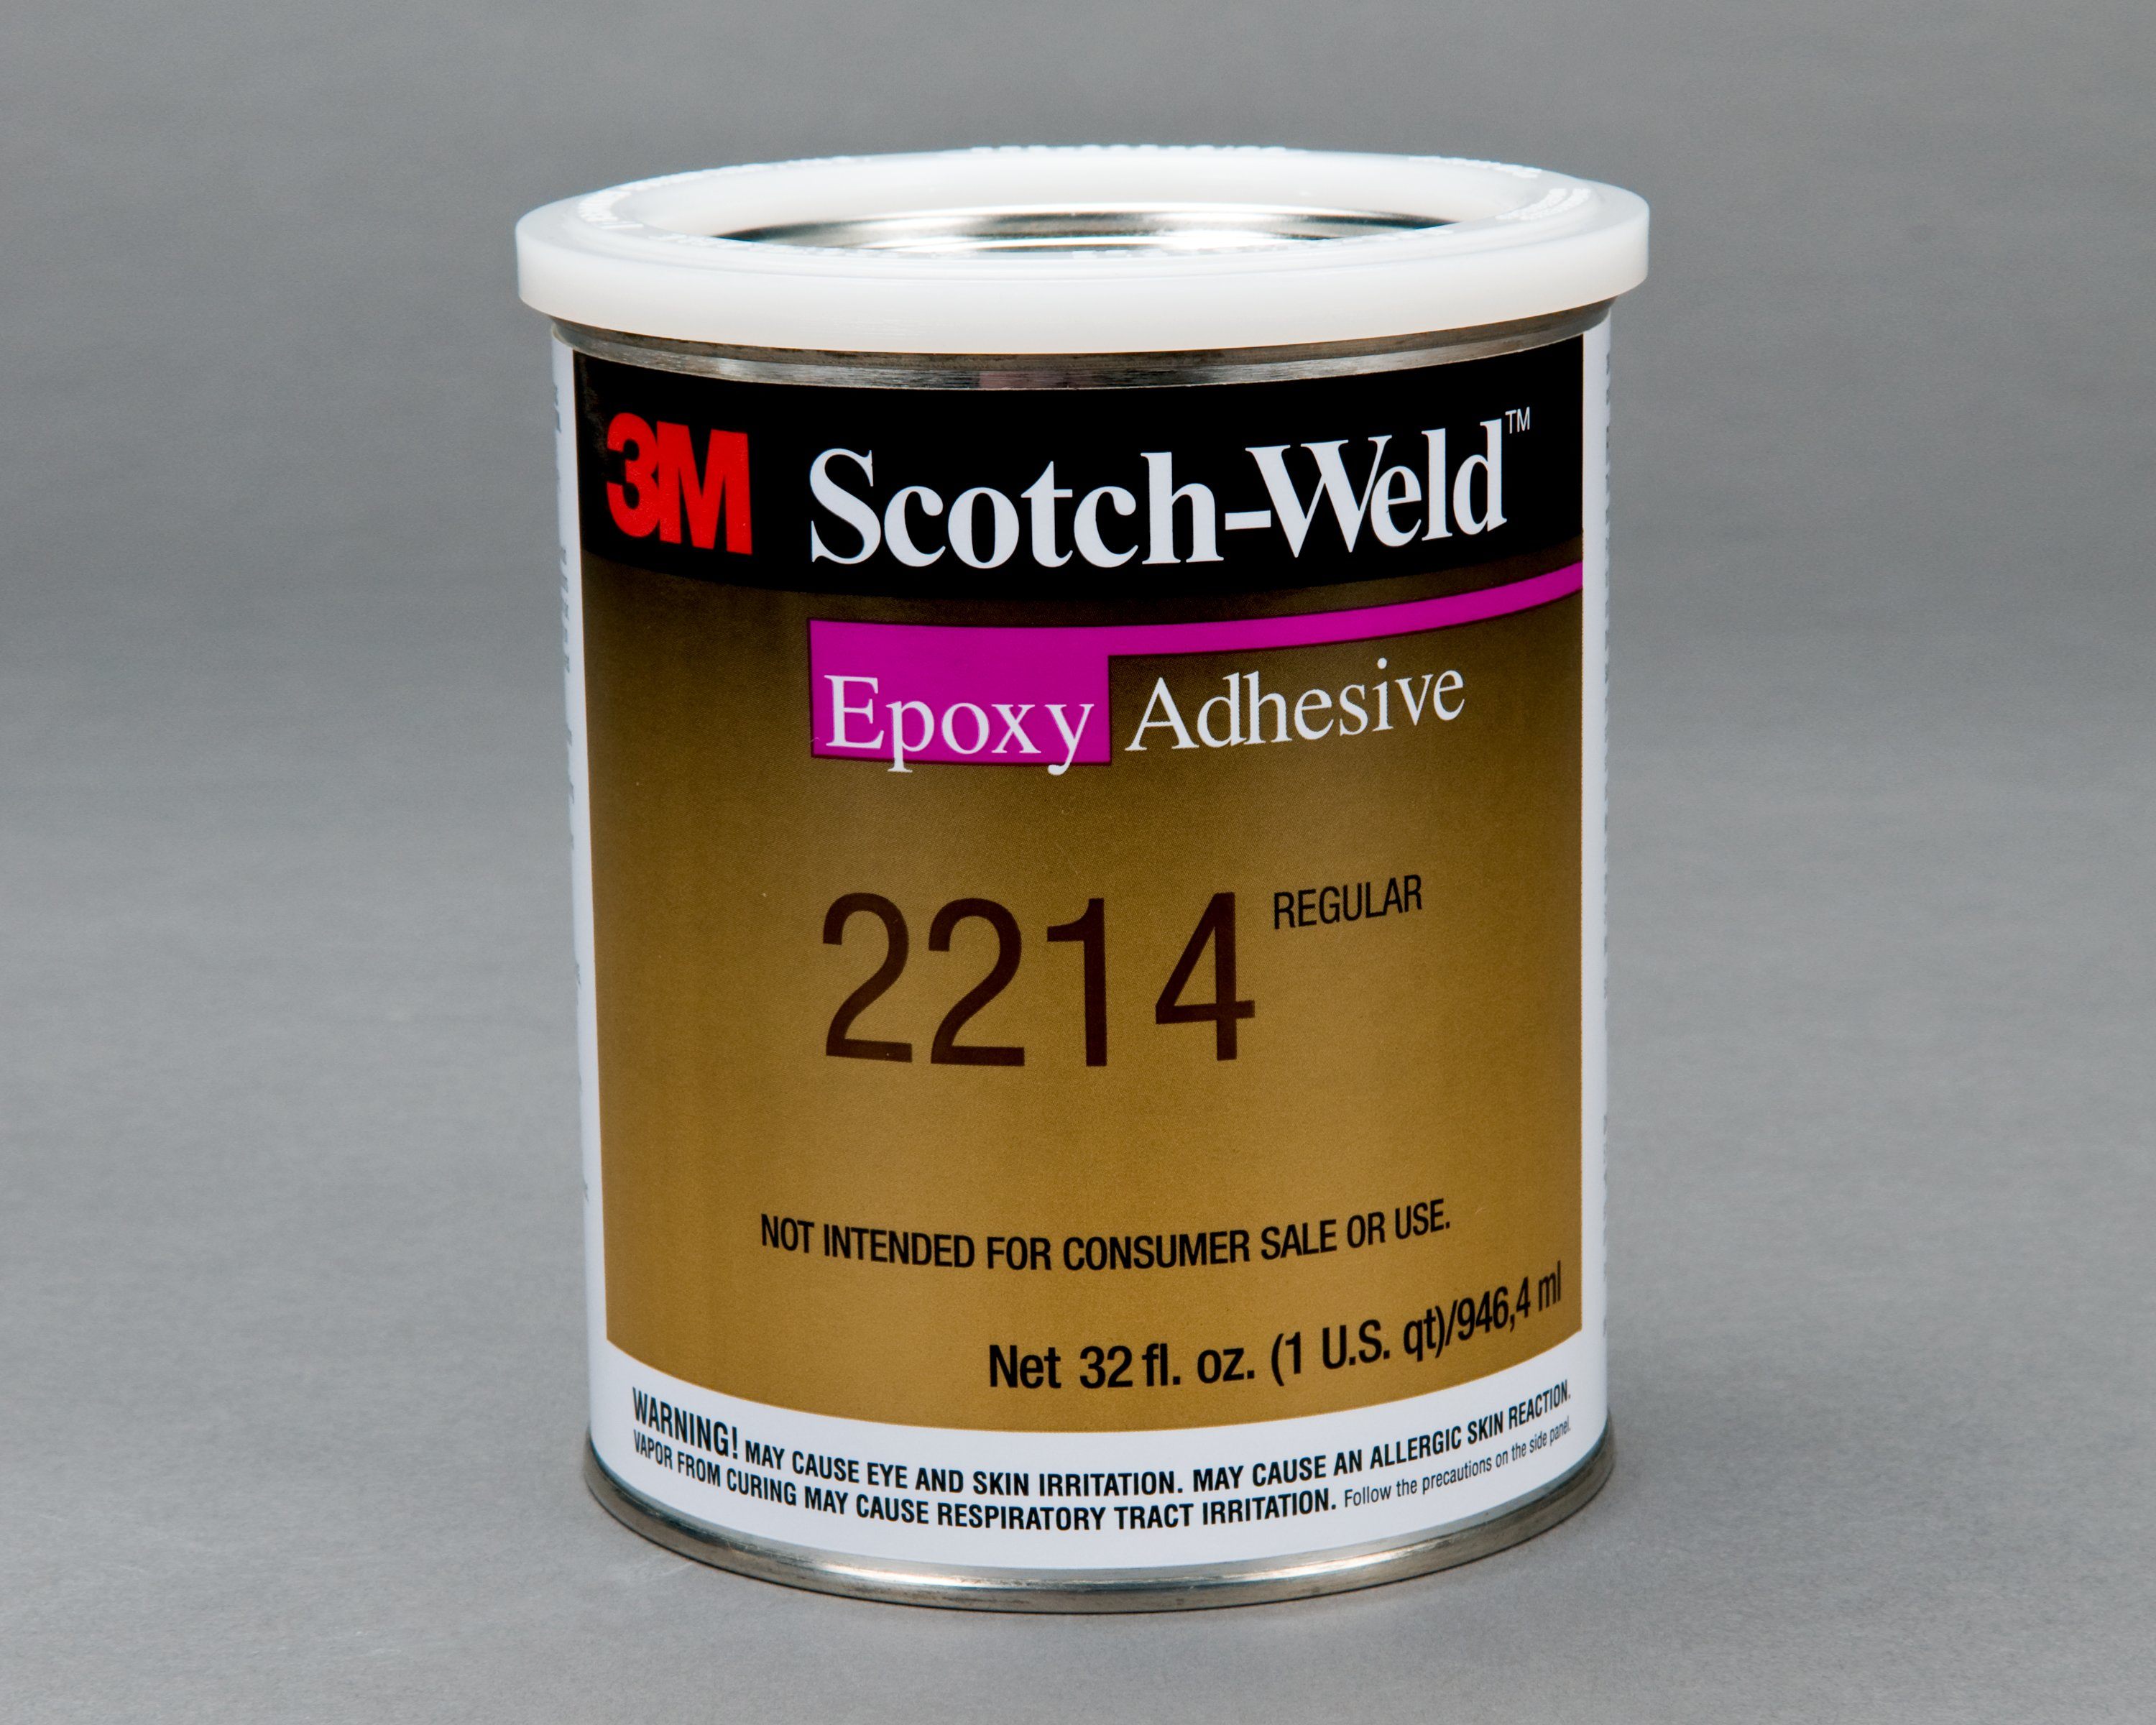 3M™ Scotch-Weld™ Epoxy Adhesive 2214 Hi-Temp is designed for use in applications where high strength bonds are needed in a temperature range of -180°F to 350°F (82°C to 177°C).